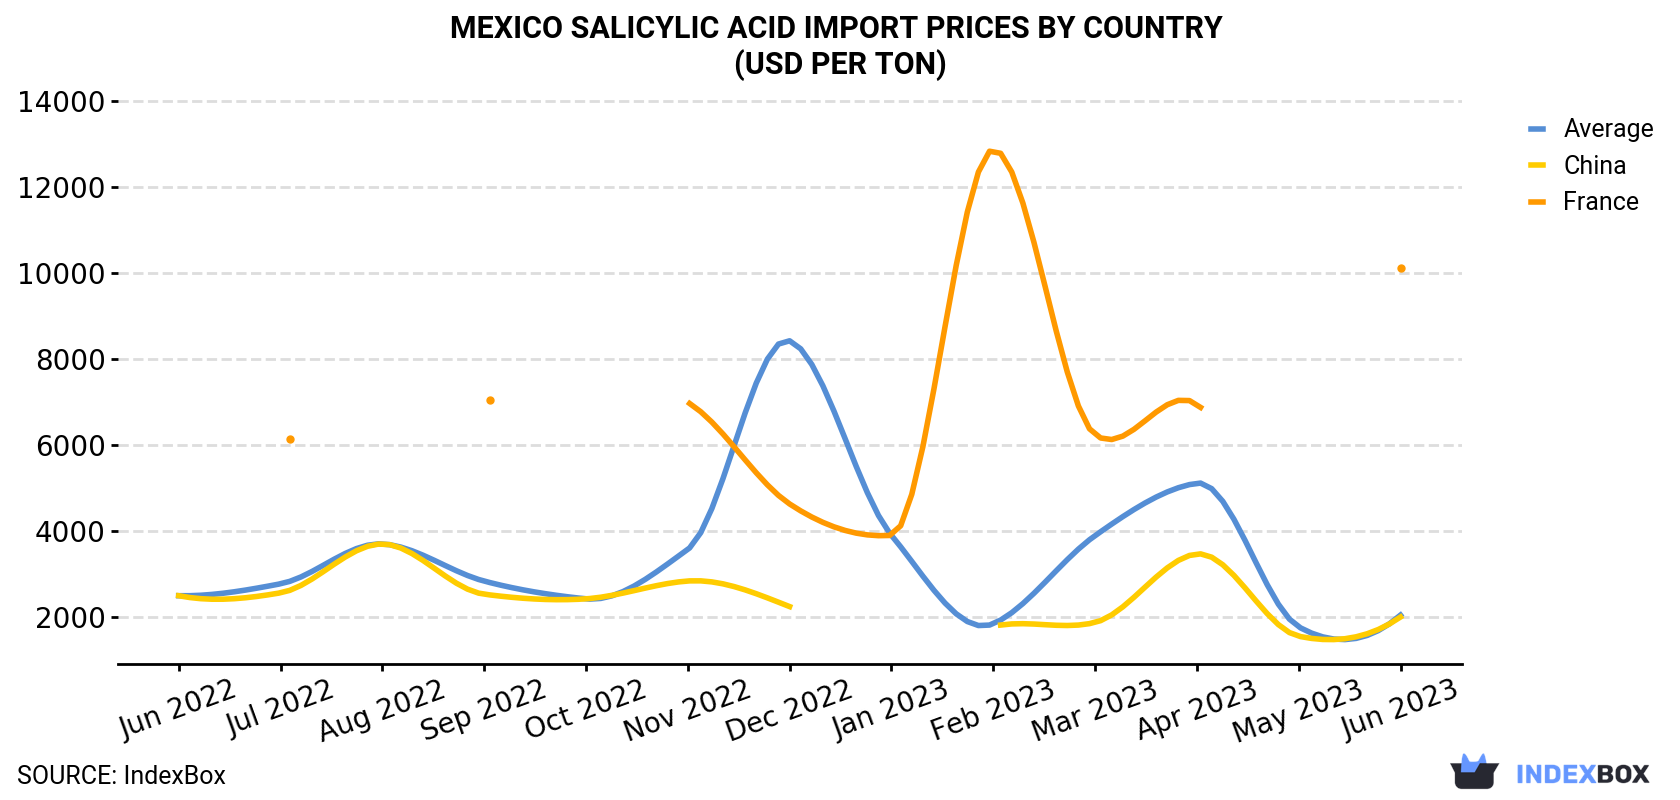 Mexico Salicylic Acid Import Prices By Country (USD Per Ton)